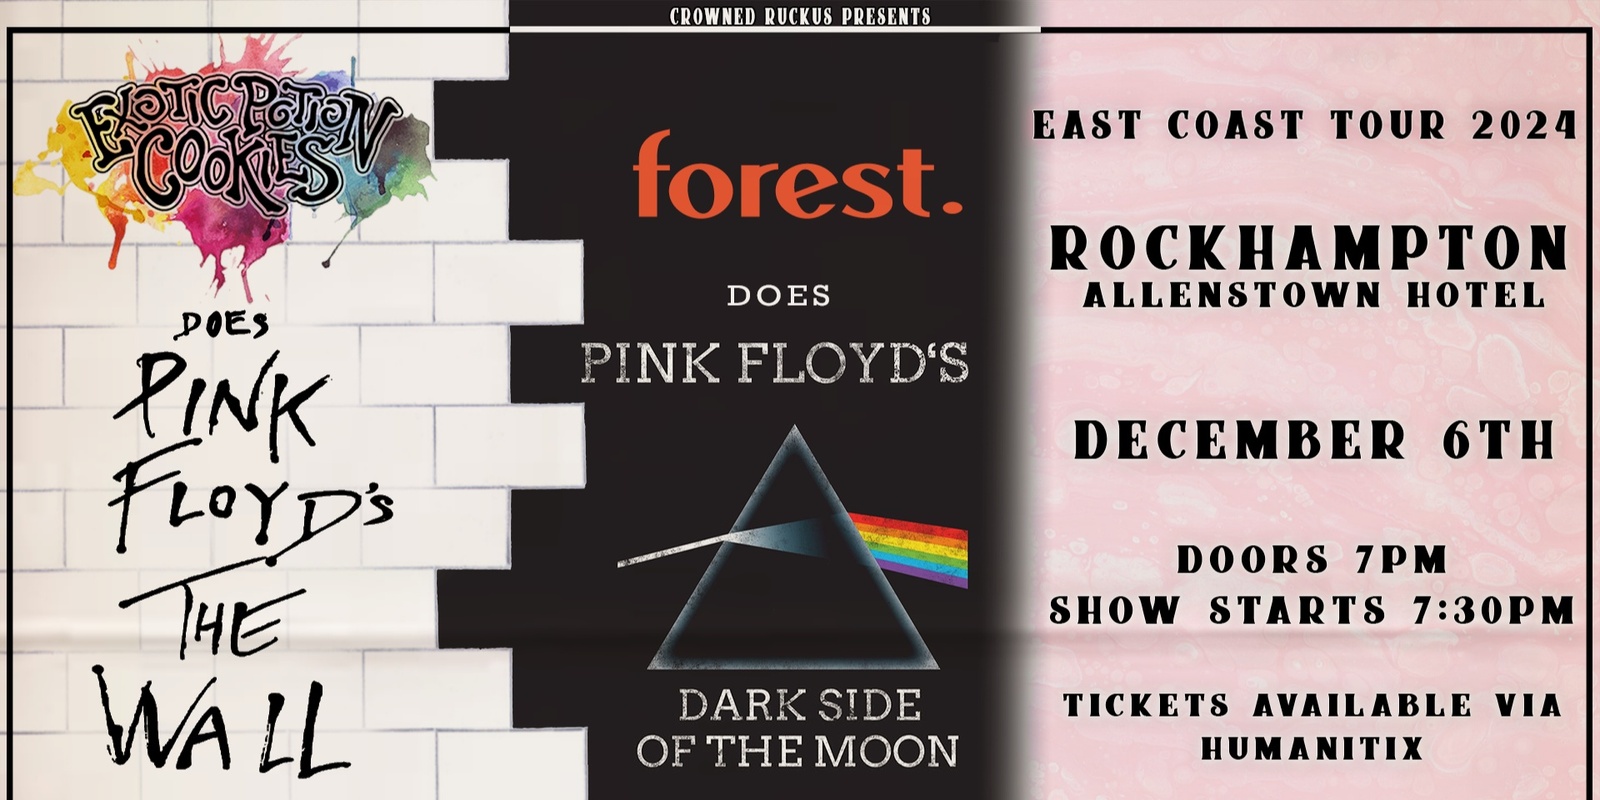 Banner image for C.R Presents: Exotic Potion Cookies does Pink Floyd's The Wall alongside Forest with Dark Side of the Moon - Rockhampton